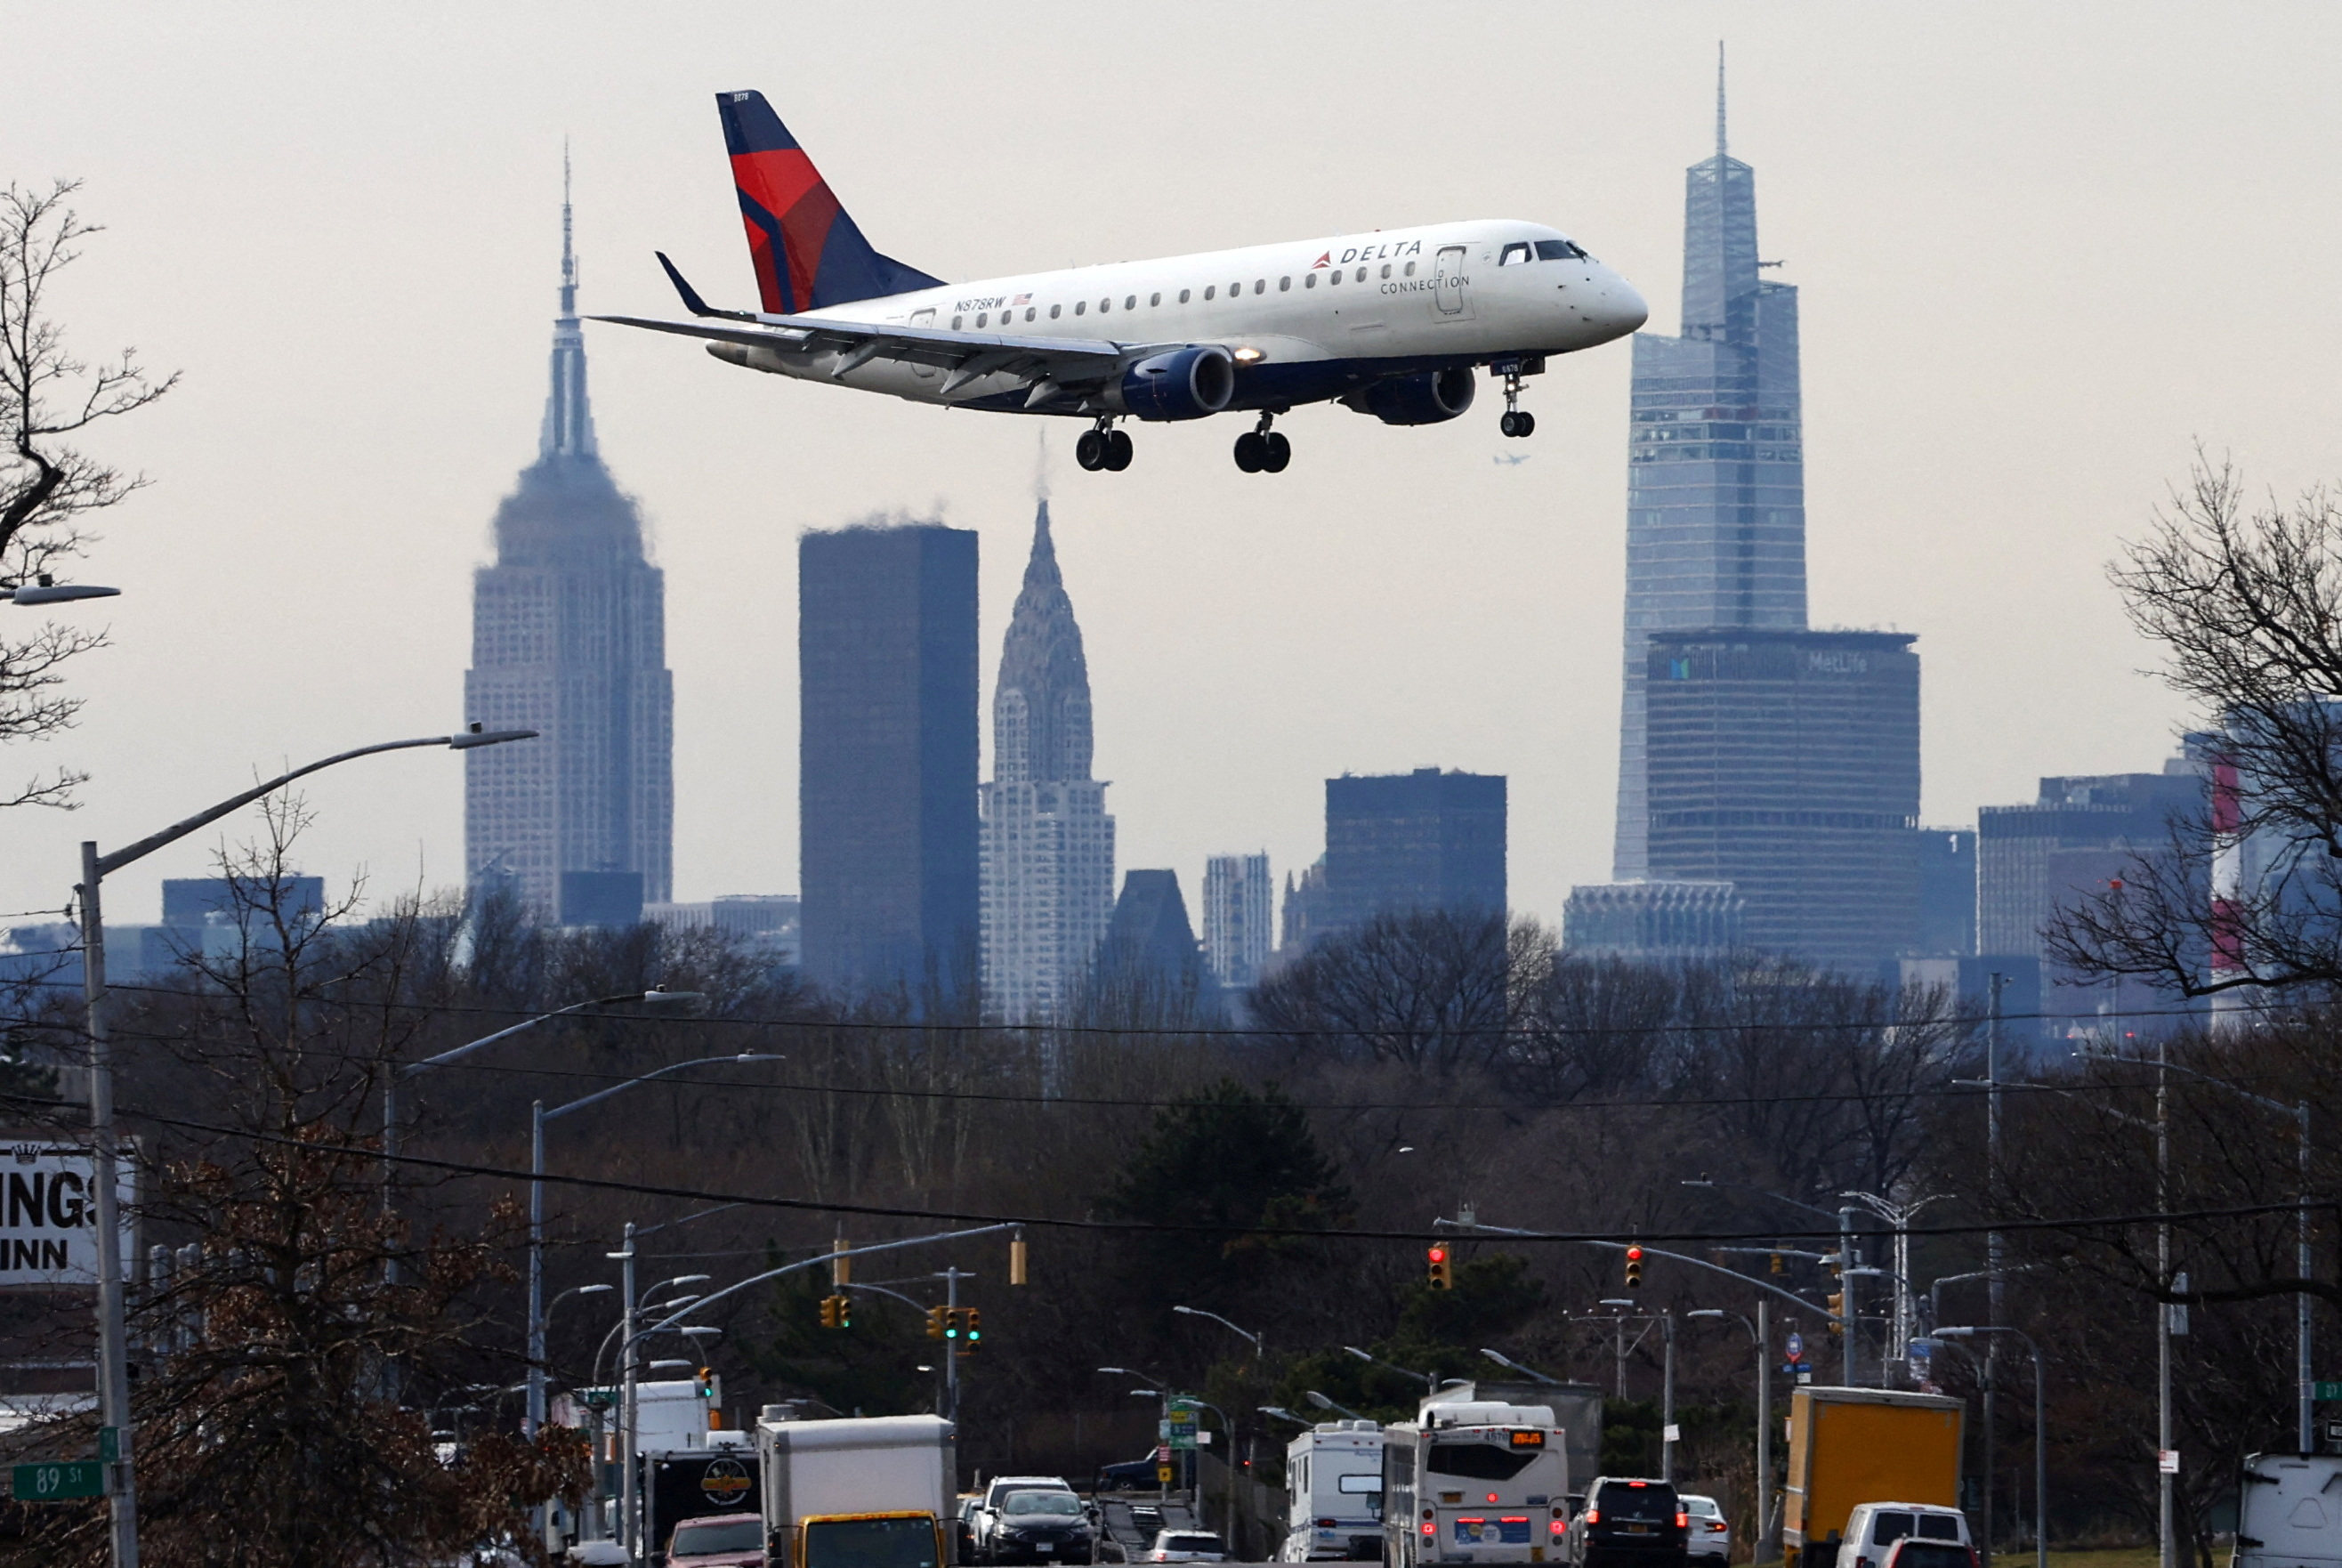 A Delta Airlines jet comes in for a landing in front of the Empire State Building and Manhattan skyline at Laguardia Airport, in New York City, New York. Photo: Reuters